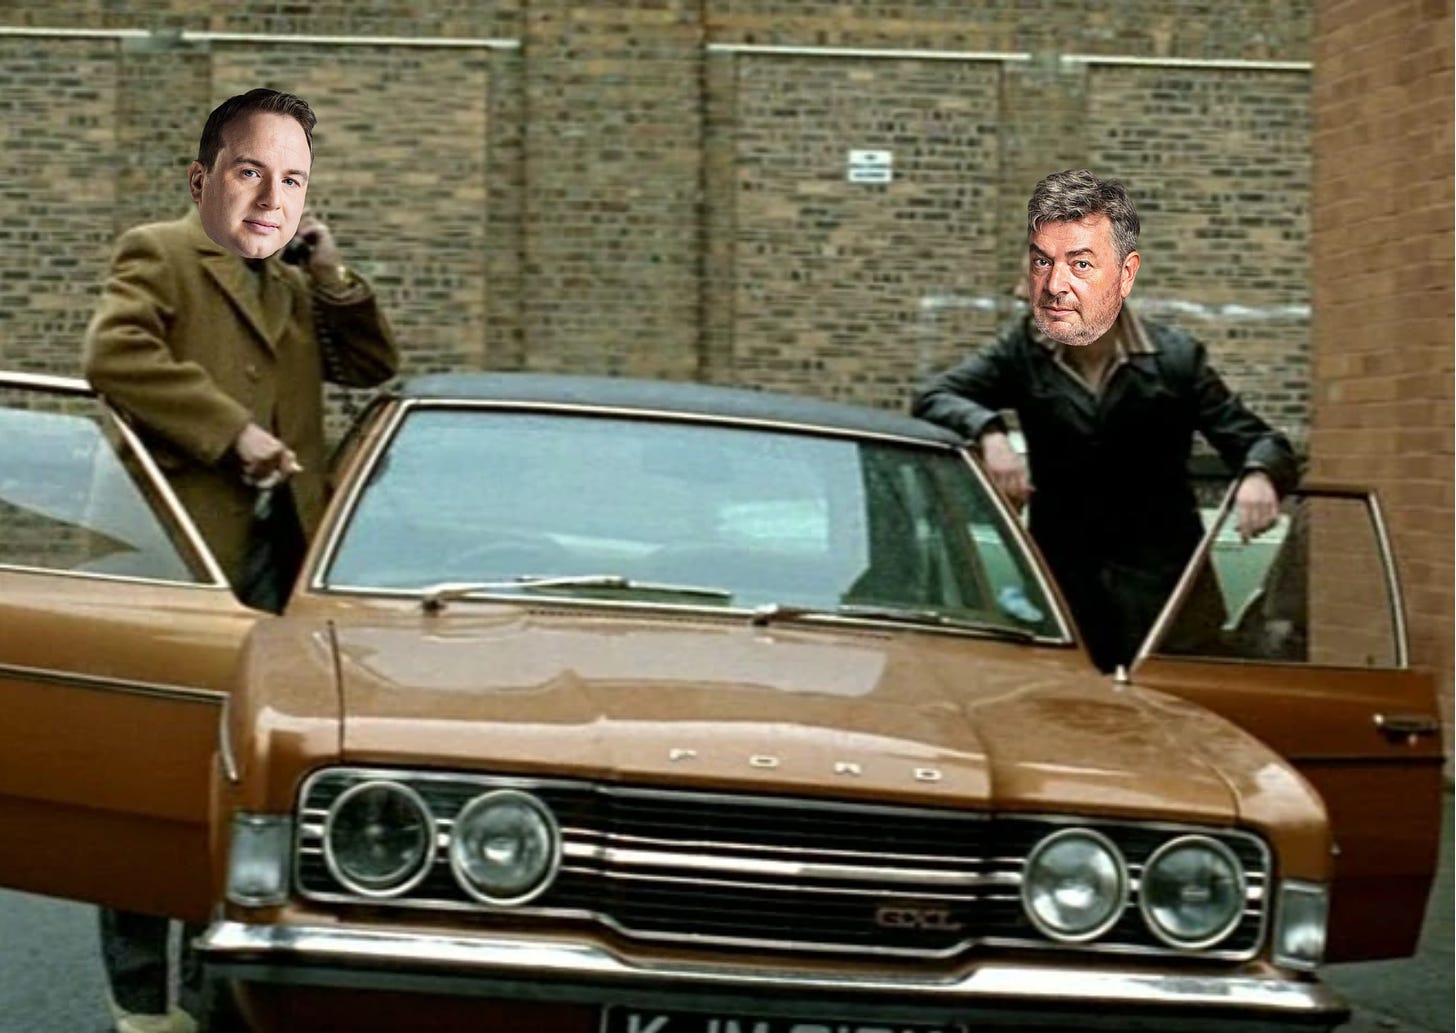 'Comedia' Matt Forde and David Aaronovitch (in a natty fake leather jacket) remake Ashes to Ashes, Ford Granada included